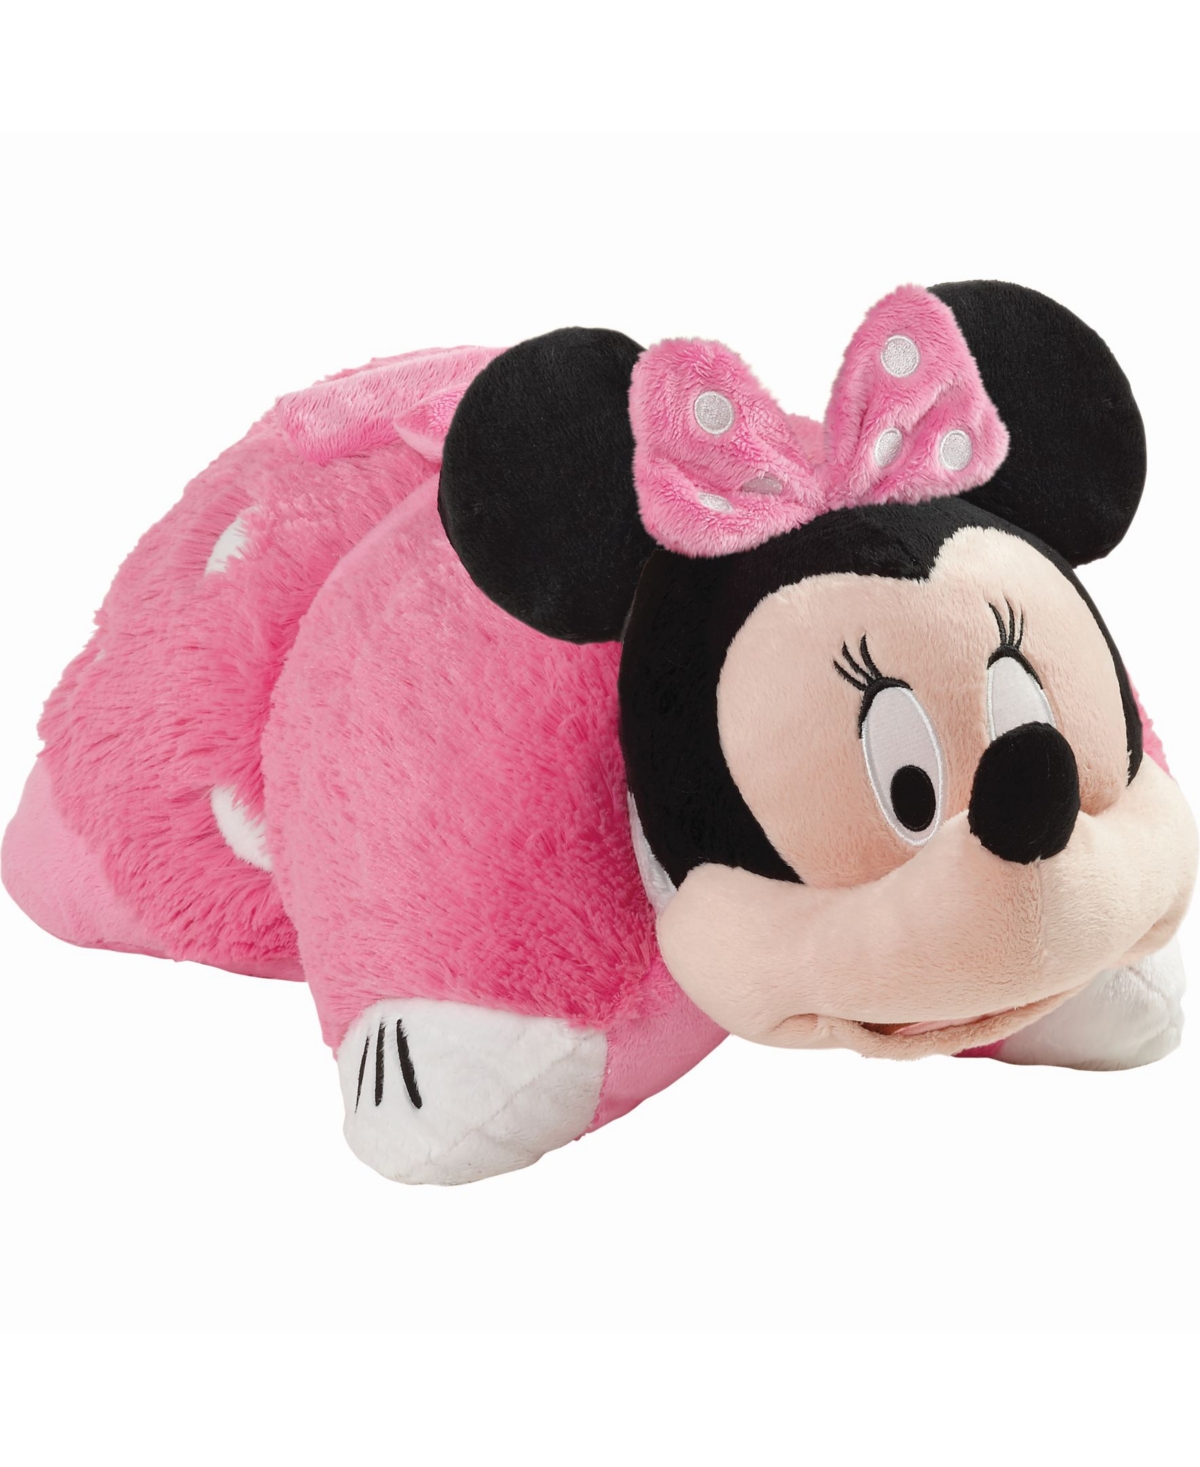 Pillow Pets Disney Minnie Mouse Stuffed Animal Plush Toy In Pink